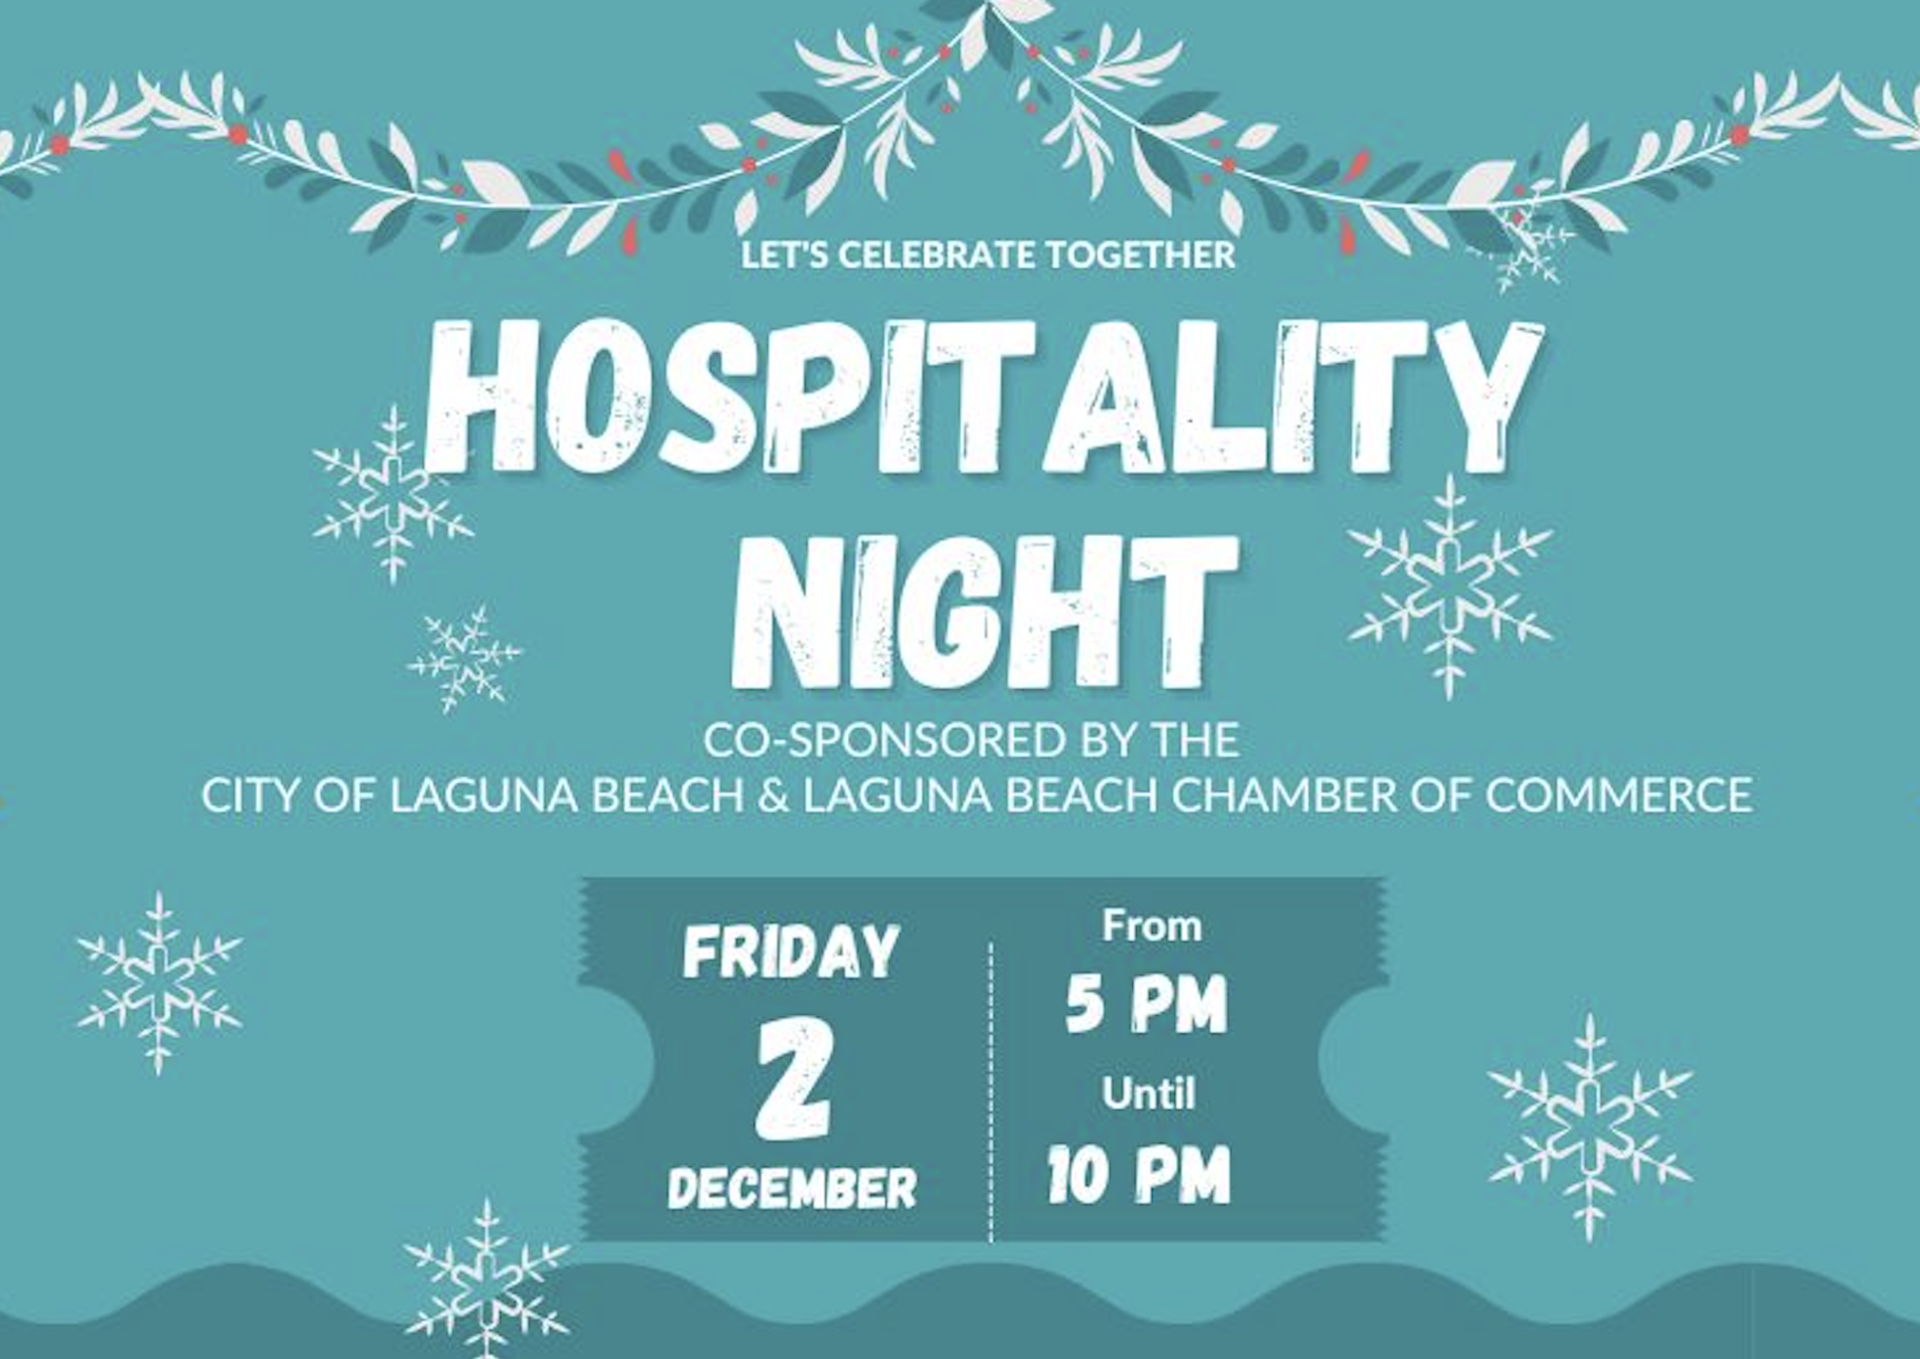 Hospitality Night is This Friday!